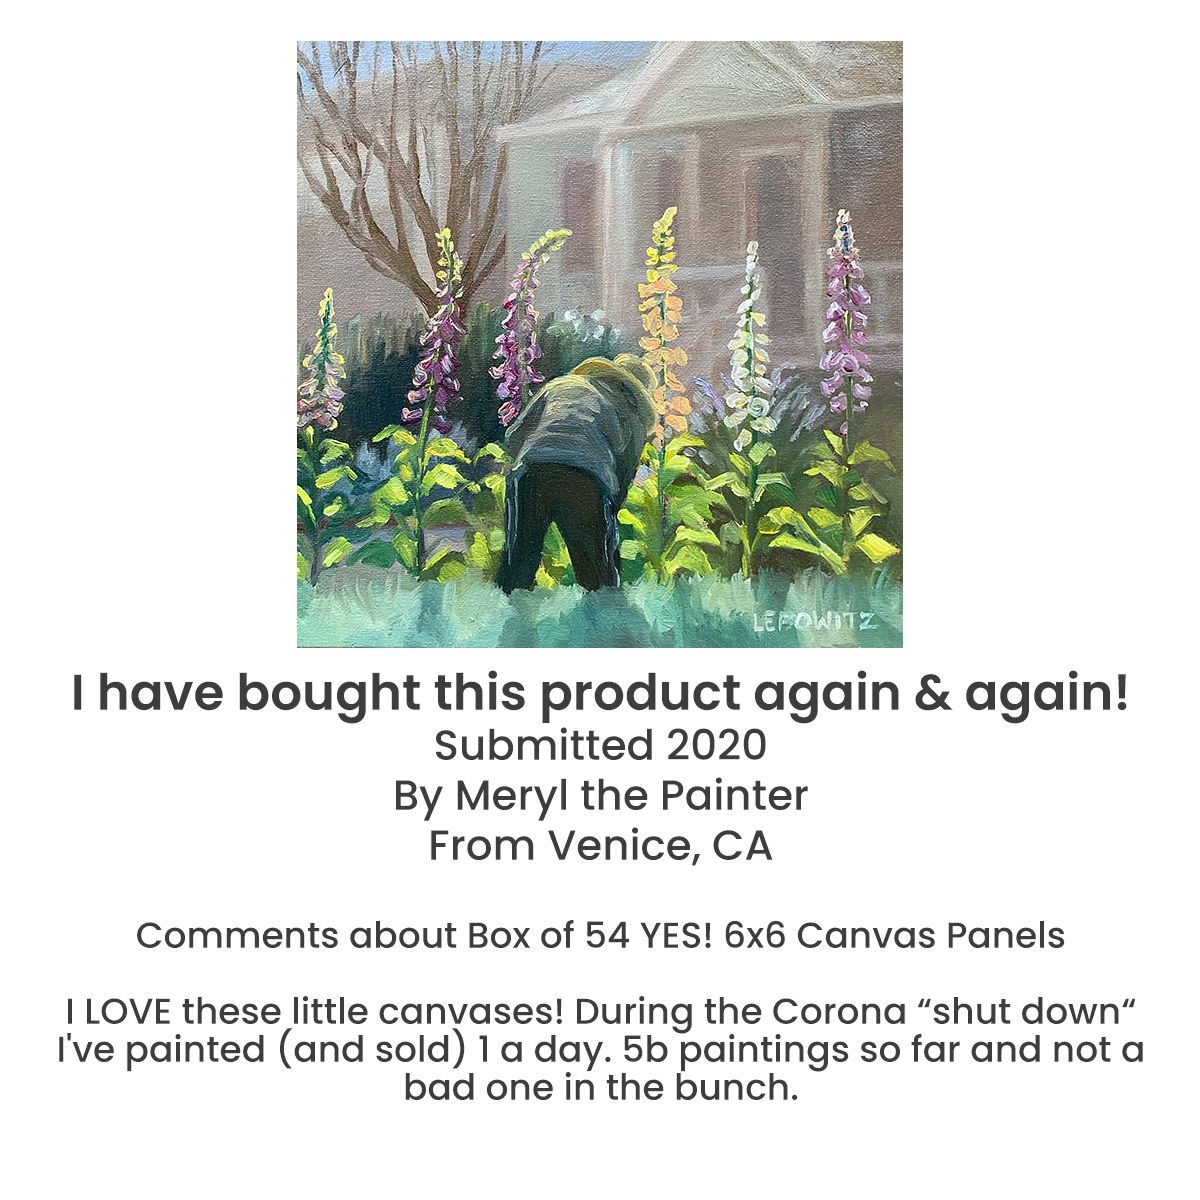 Review by Meryl the Painter